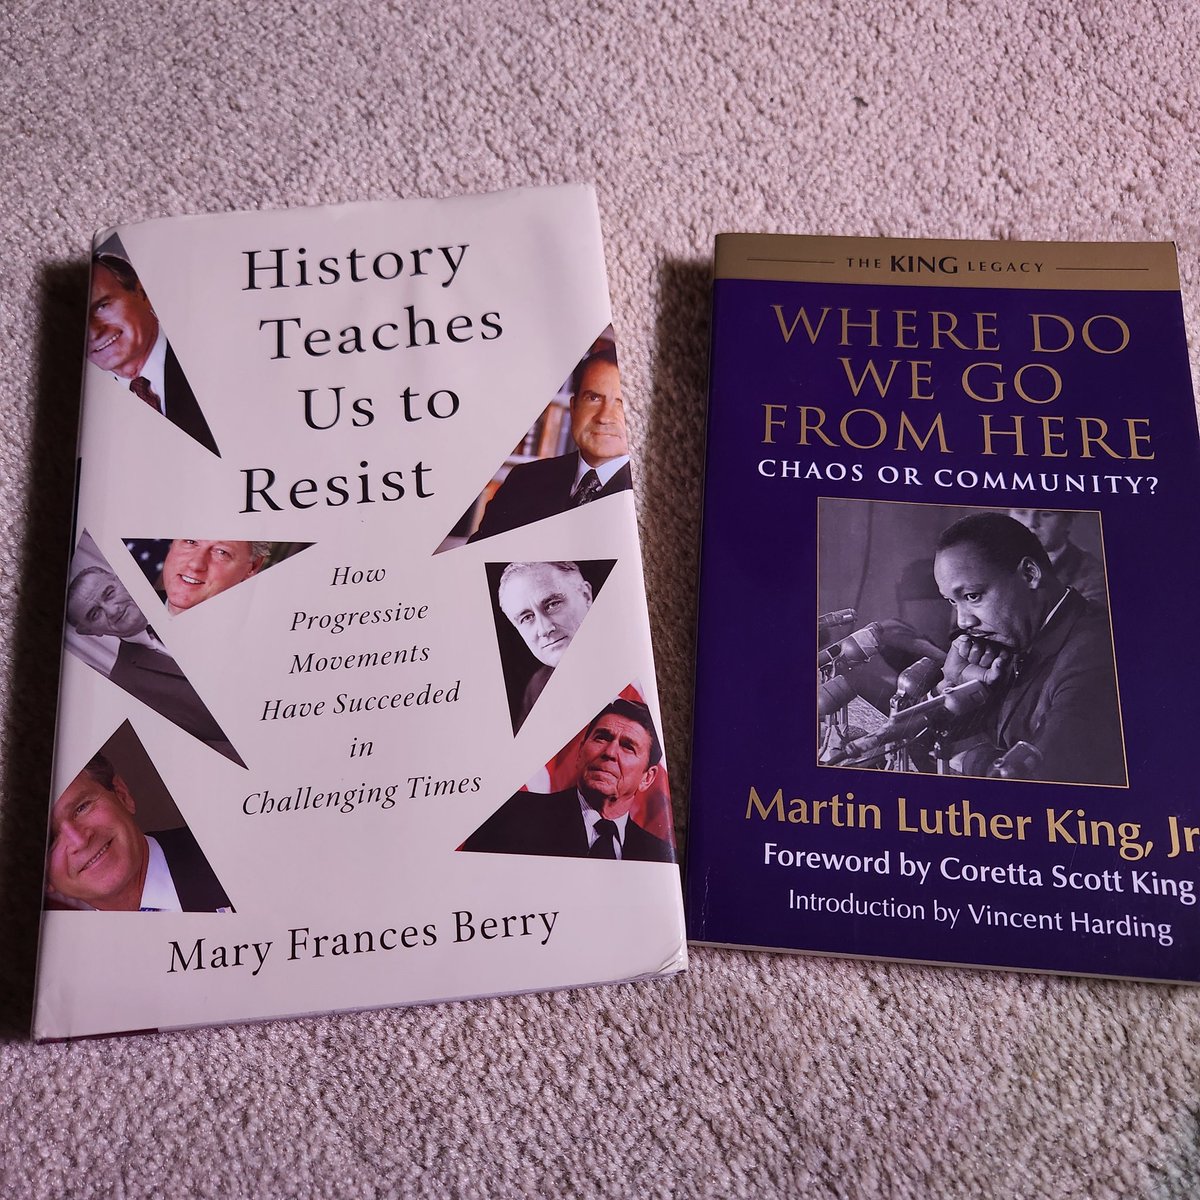 A6 I participated in an anti-racist book club led by Val Brown. Two of the books we read. #sschat